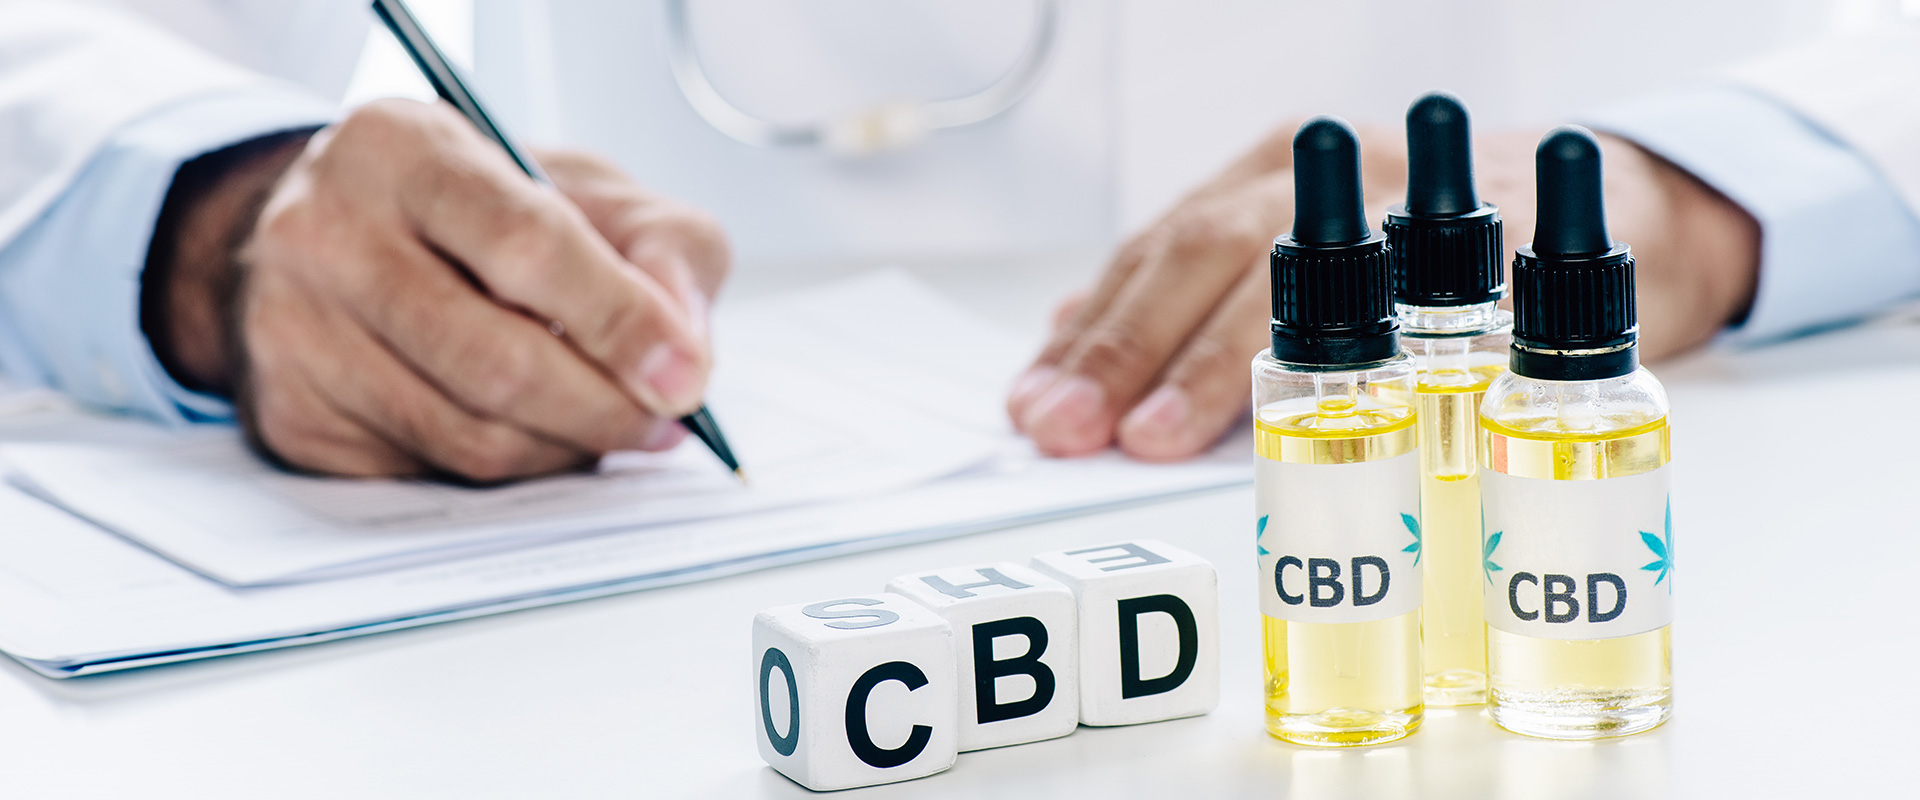 learn-Does-CBD-interact-with-any-medications